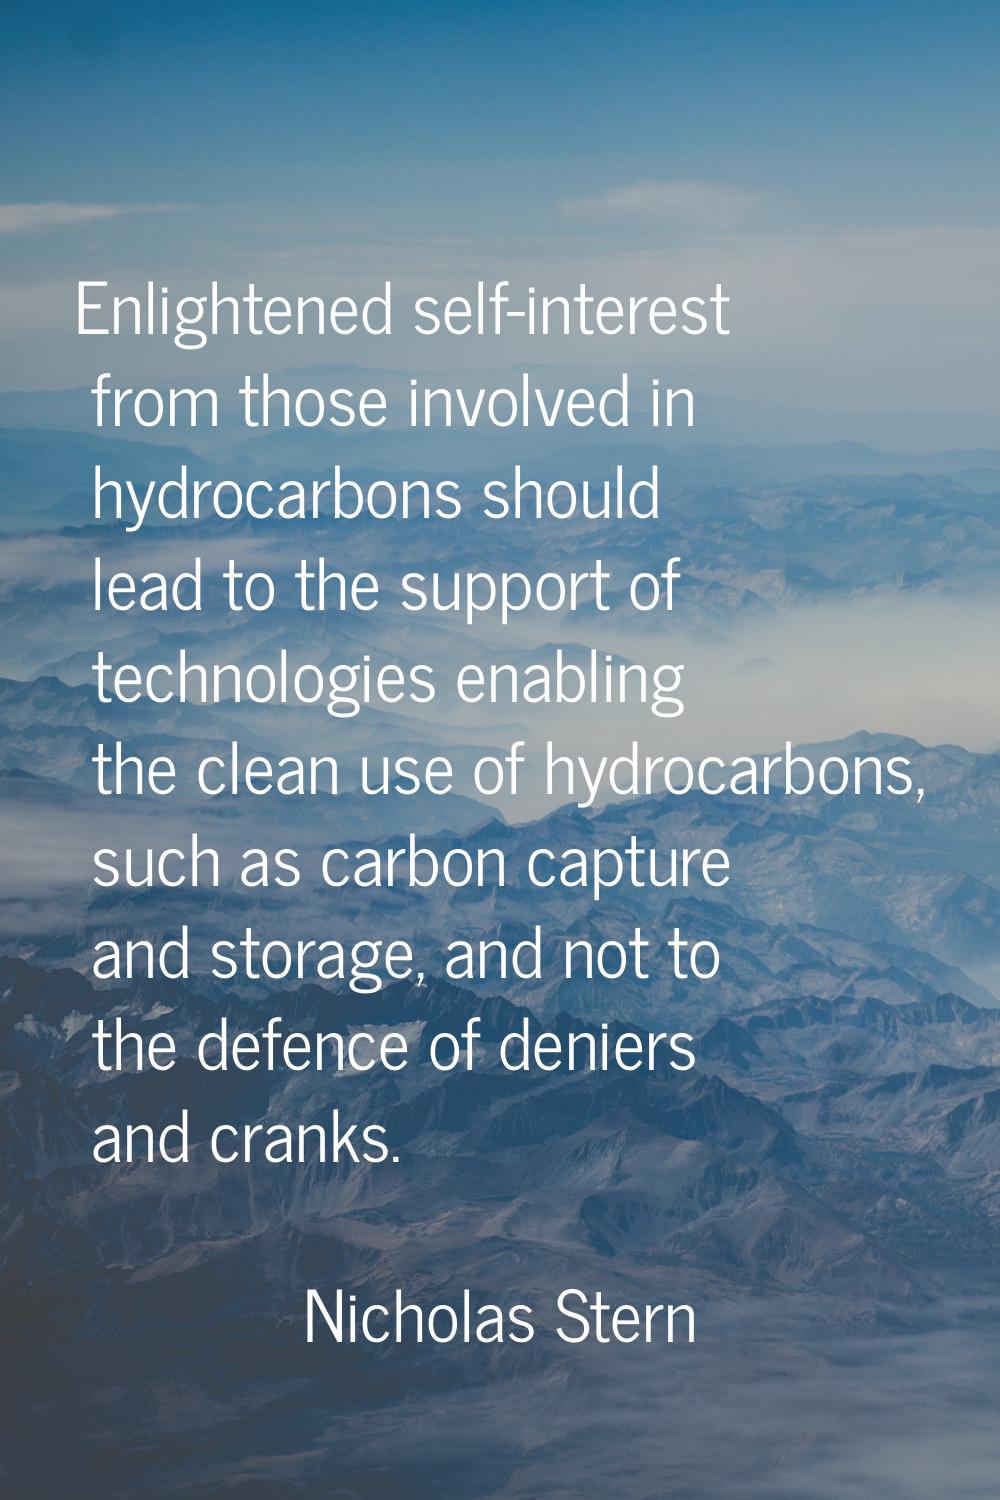 Enlightened self-interest from those involved in hydrocarbons should lead to the support of technol